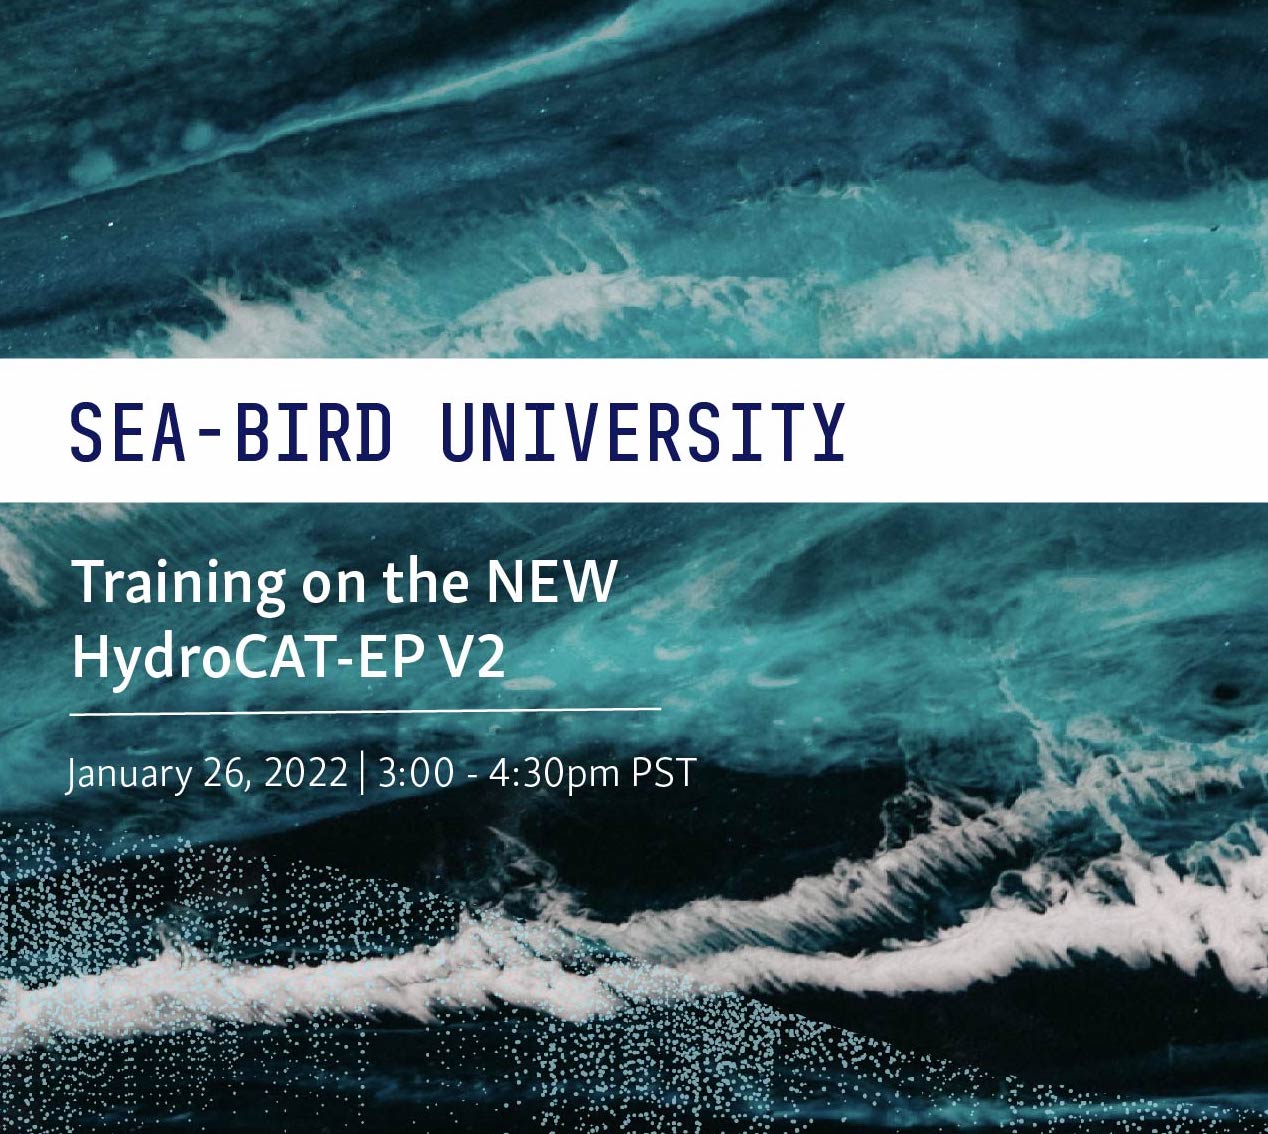 Promotional image for Sea-Bird University on January 26th 2022 